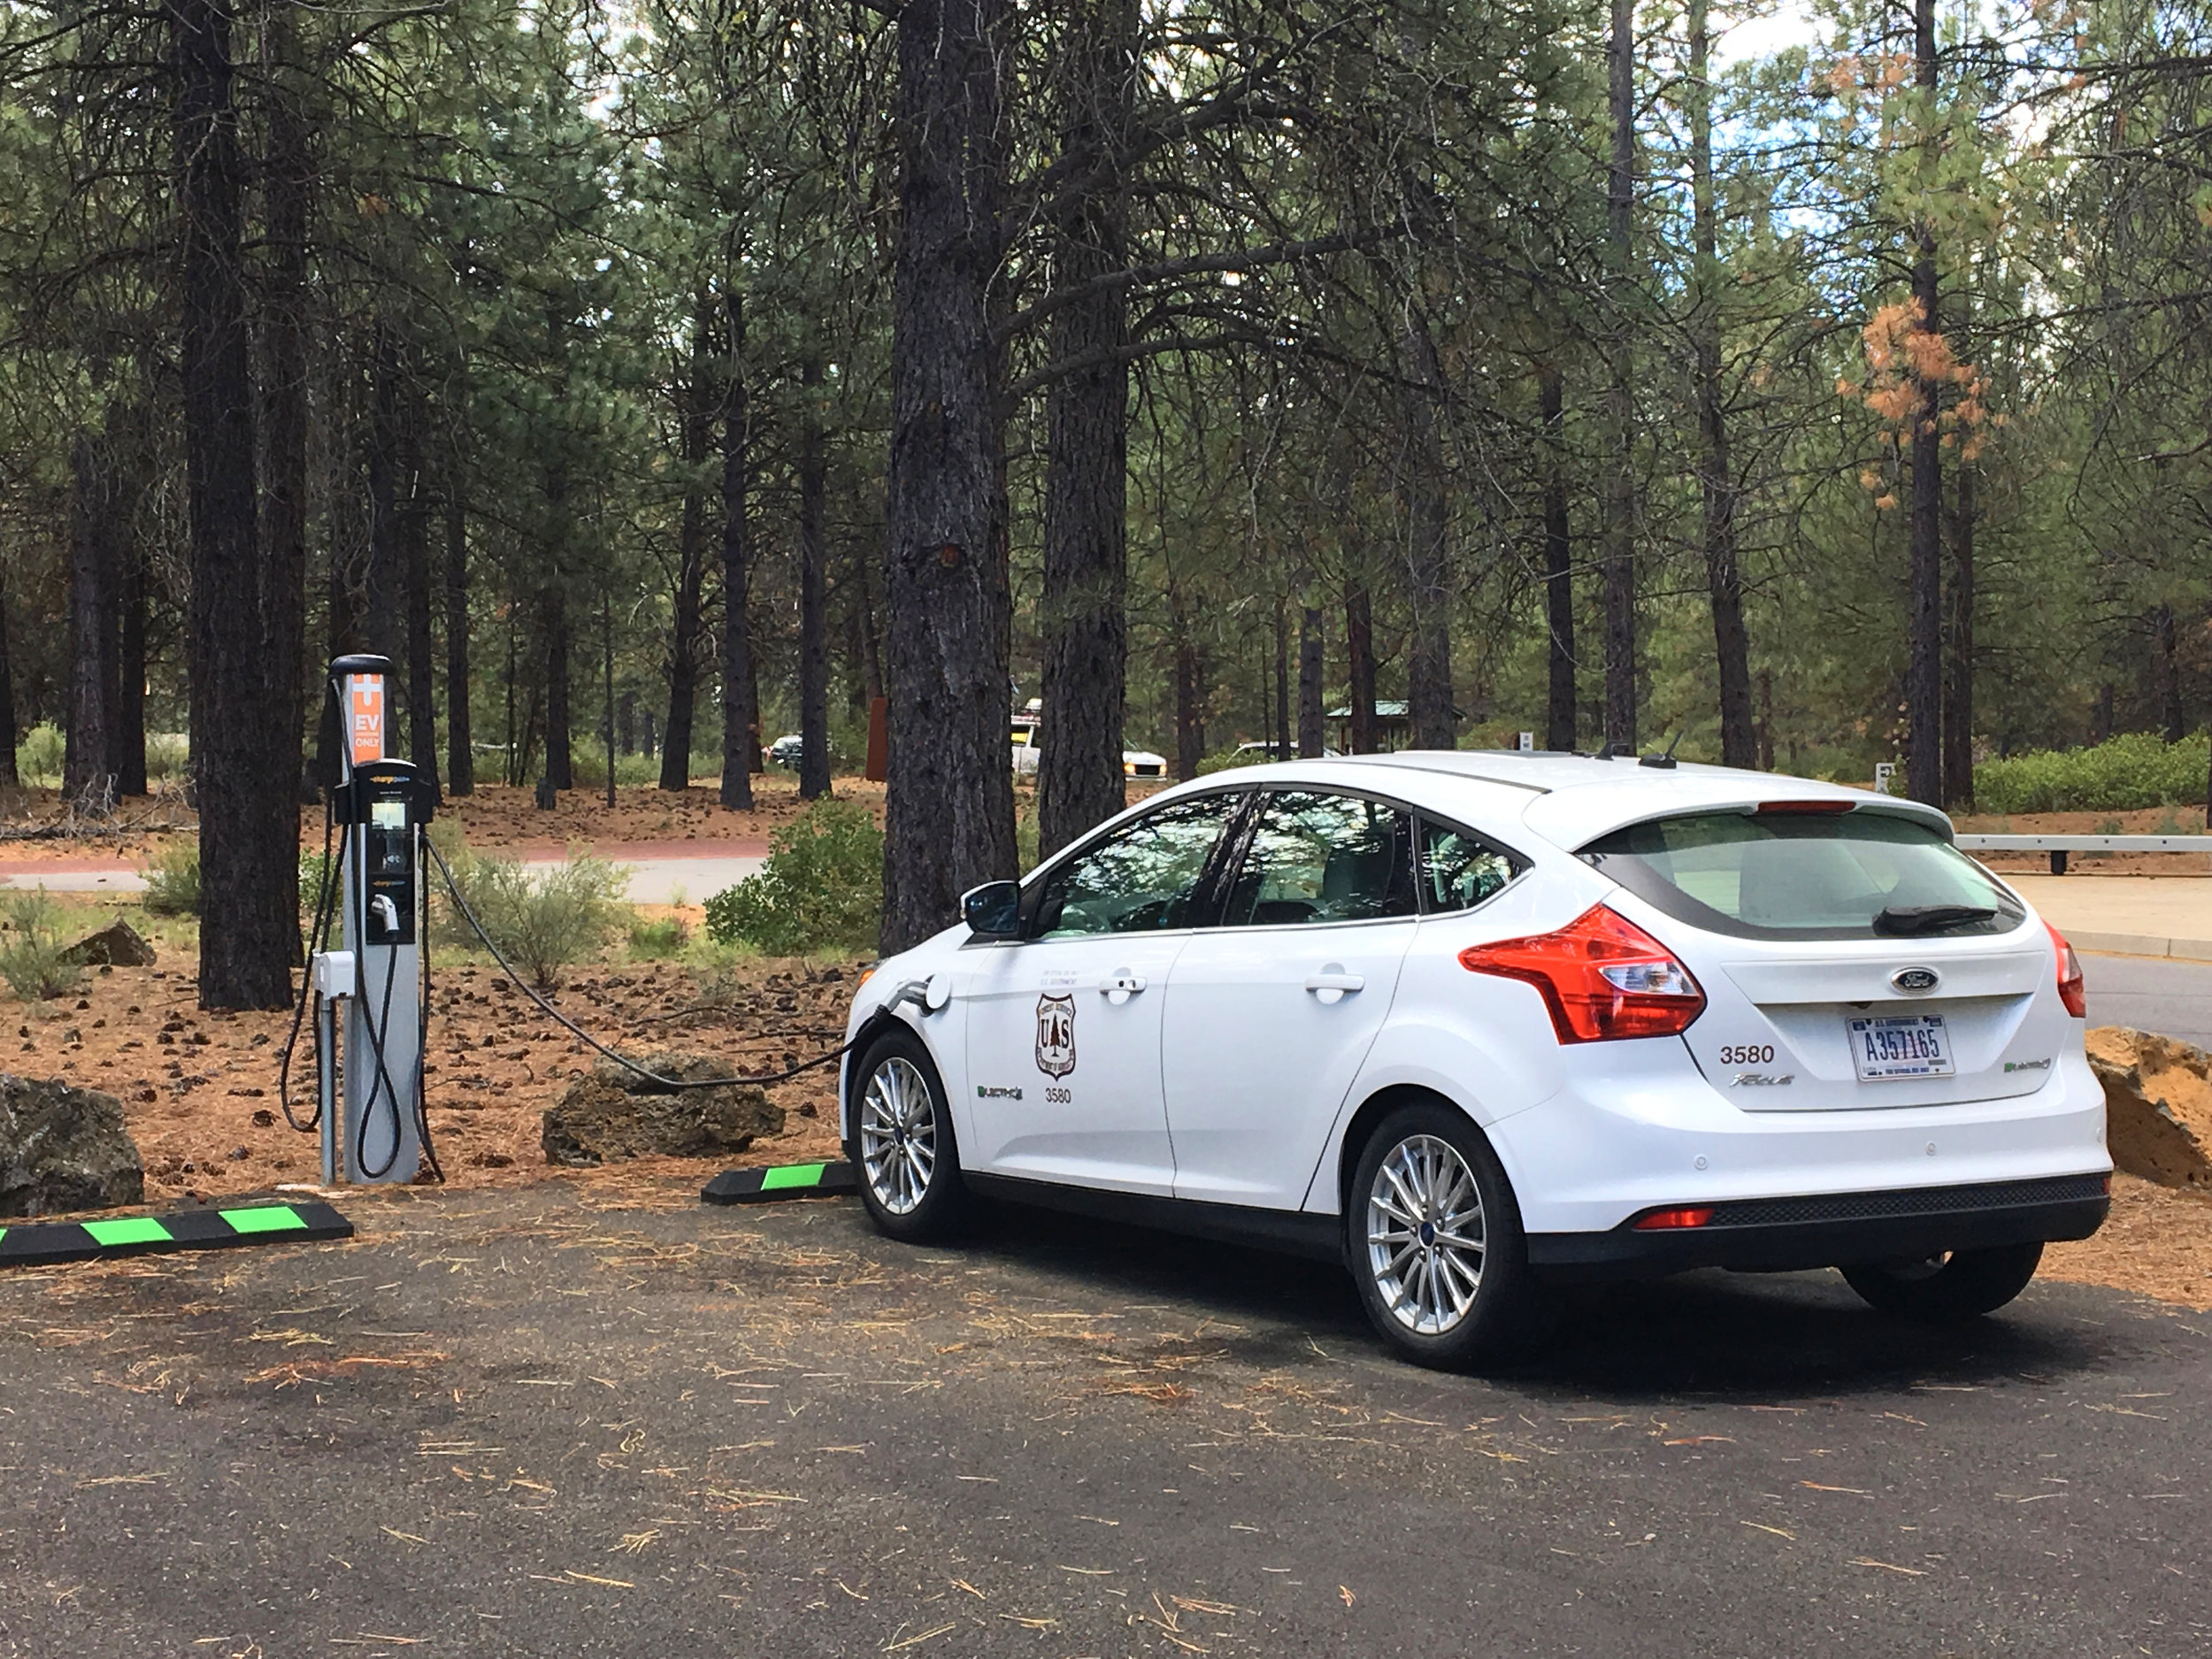  The U.S. Forest Service charges up their electric vehicle at Lava Lands Visitor Center, part of the  Newberry National Volcanic Monument .  